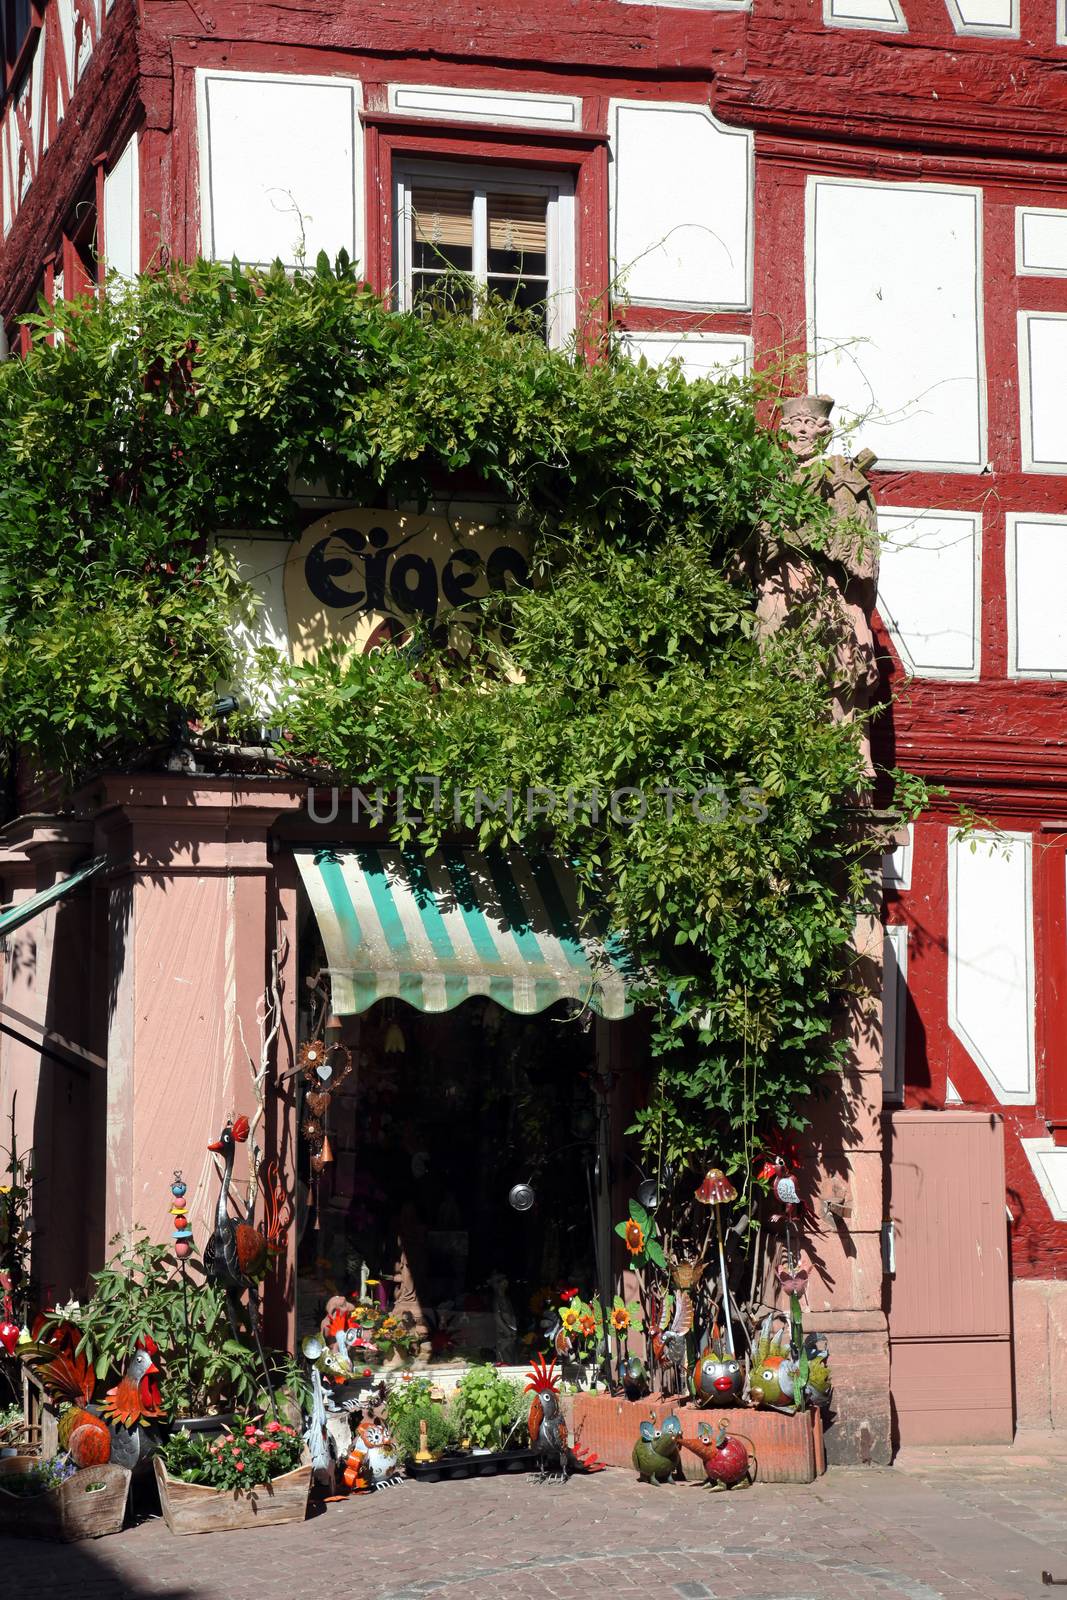 Half-timbered old house in Miltenberg, Germany by atlas